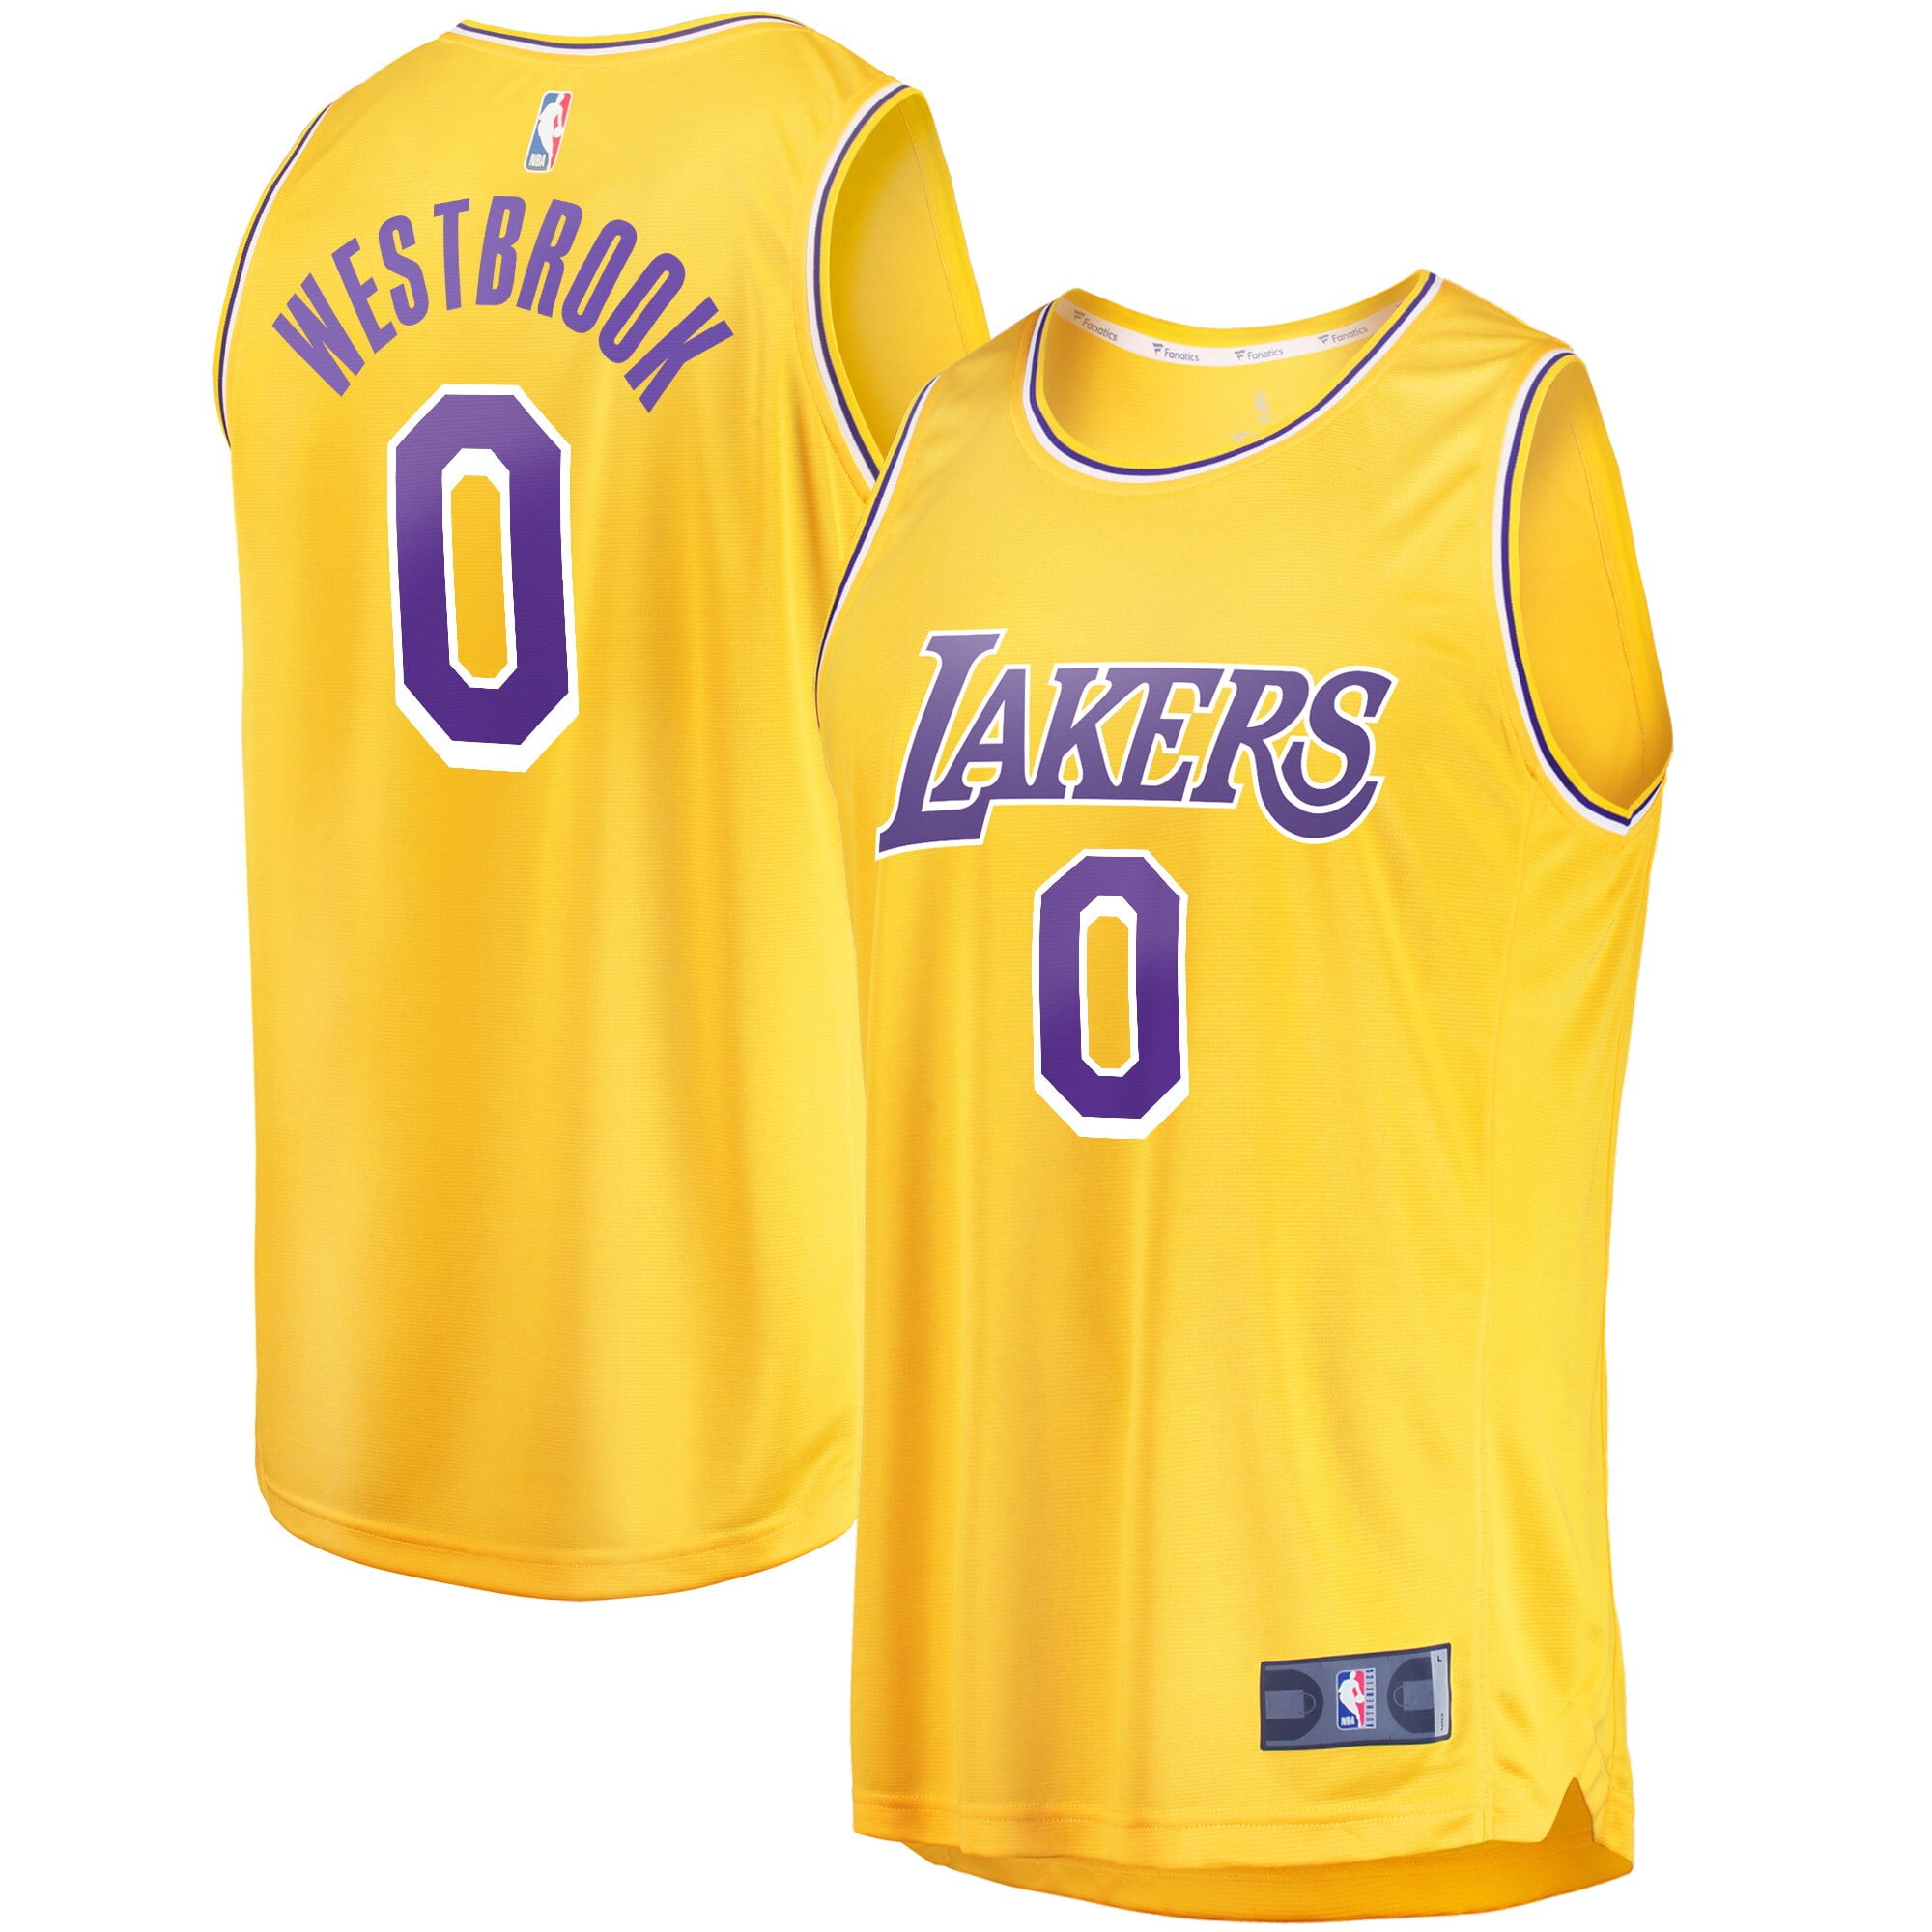 Buy Russell Westbrook Los Angeles Lakers Fanáticos de marca 202021 Fast  Break Player Jersey Gold - Icon Edition Online at Lowest Price in Ubuy  Mexico. 737069962